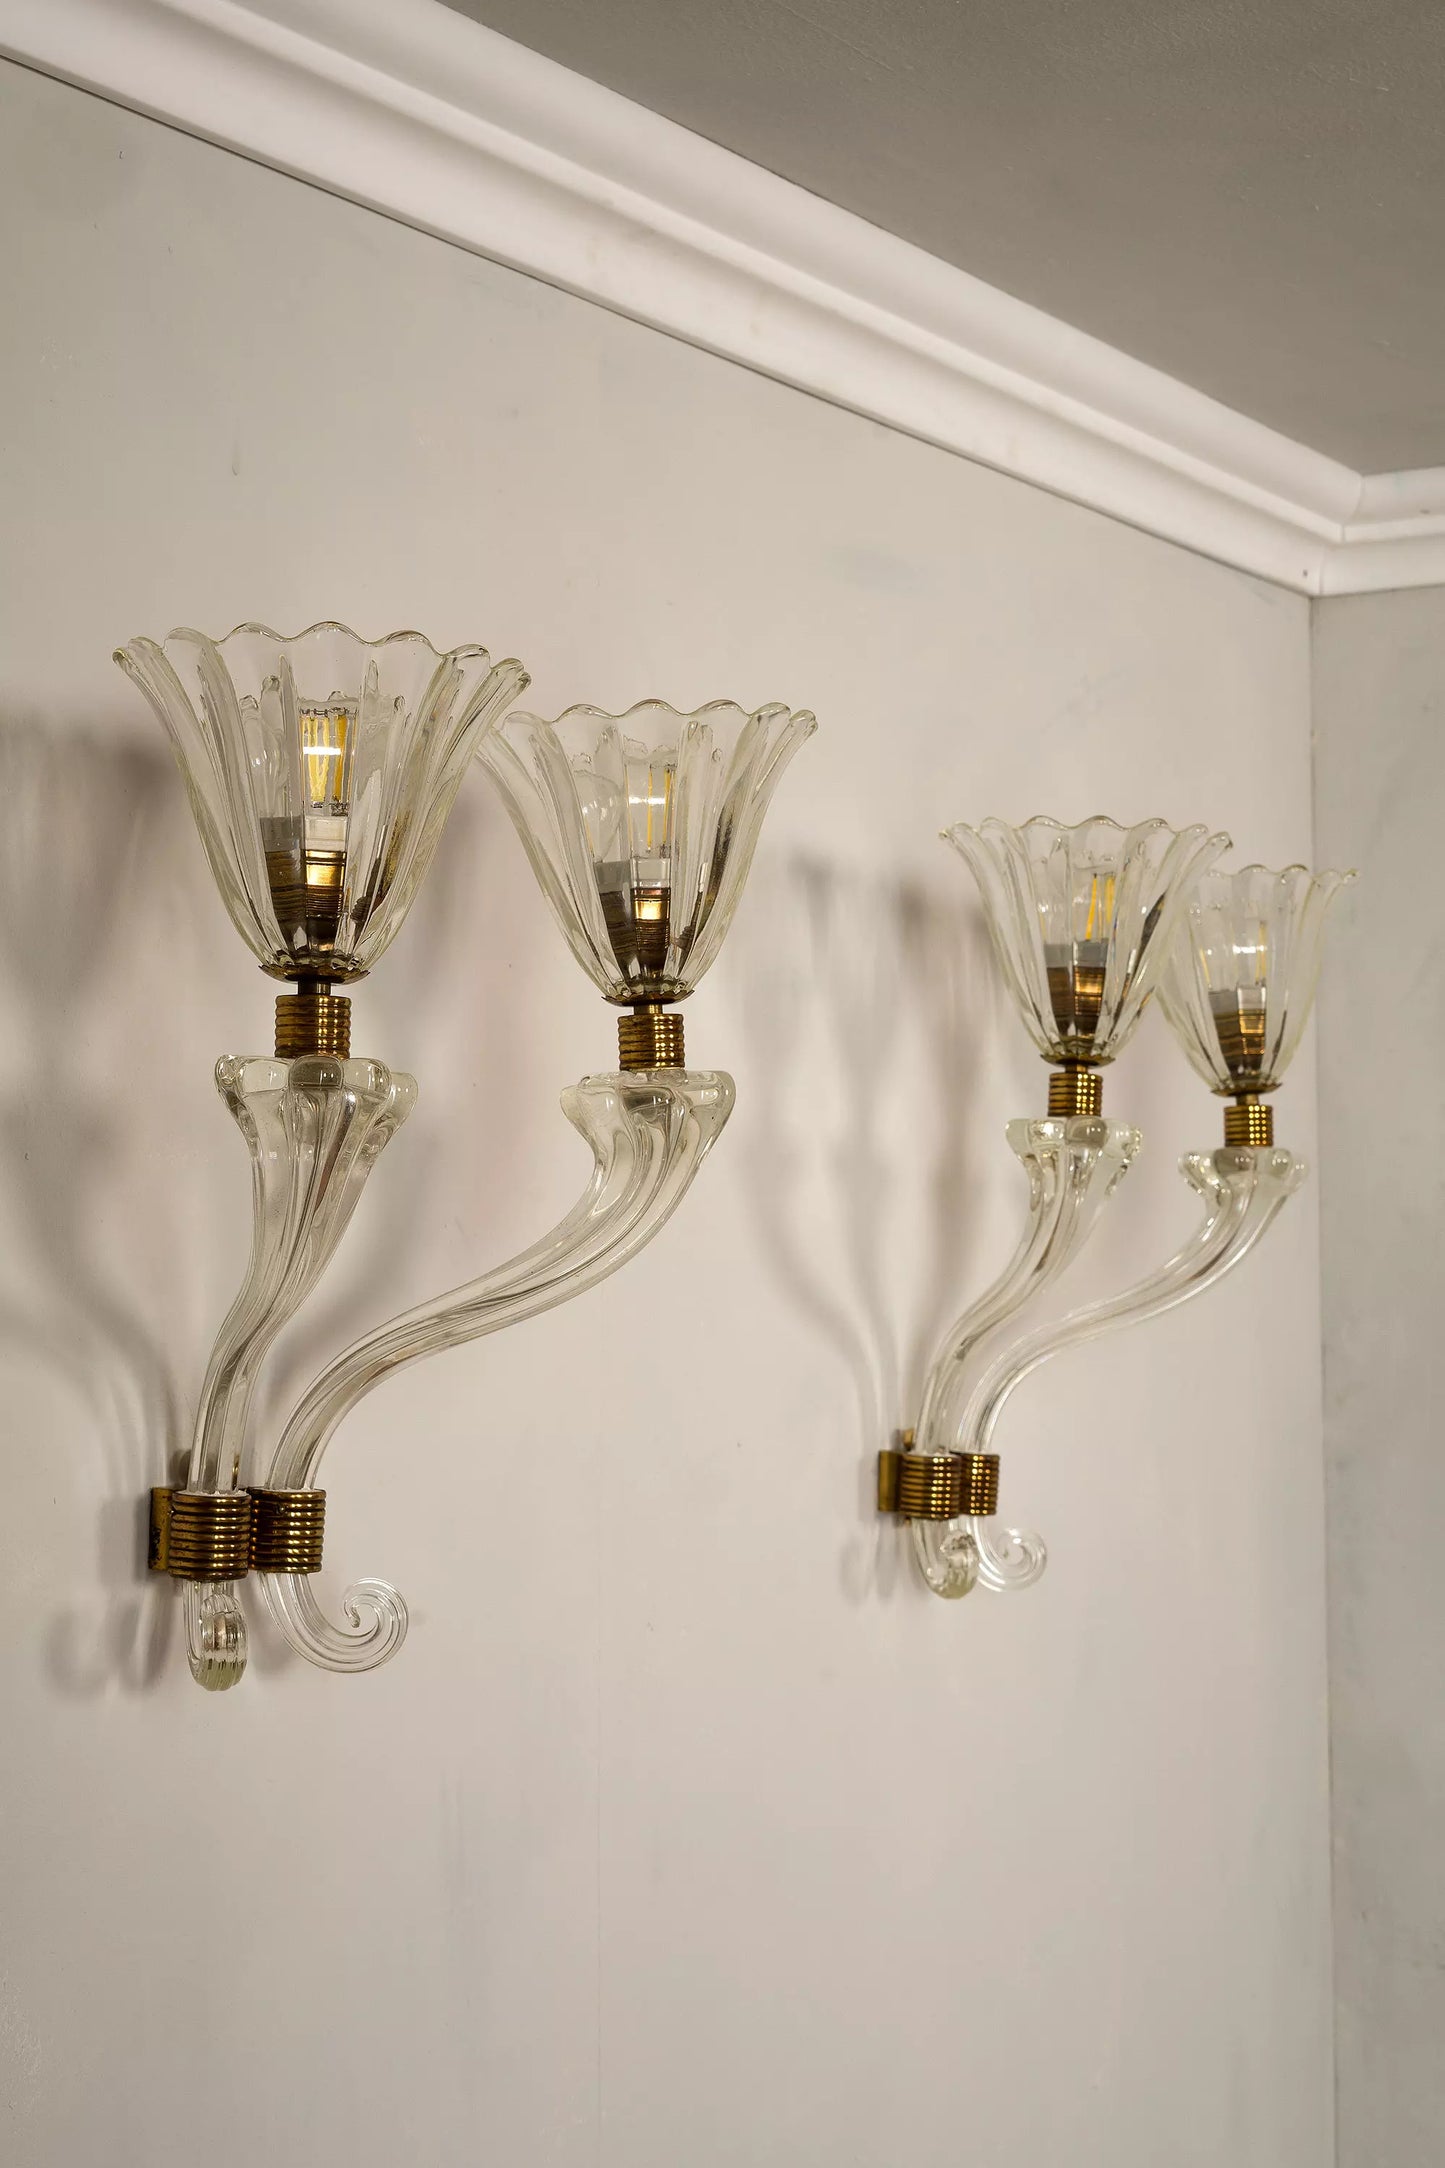 Pair of Archimede Seguso wall lamps in Murano glass from the 1930s